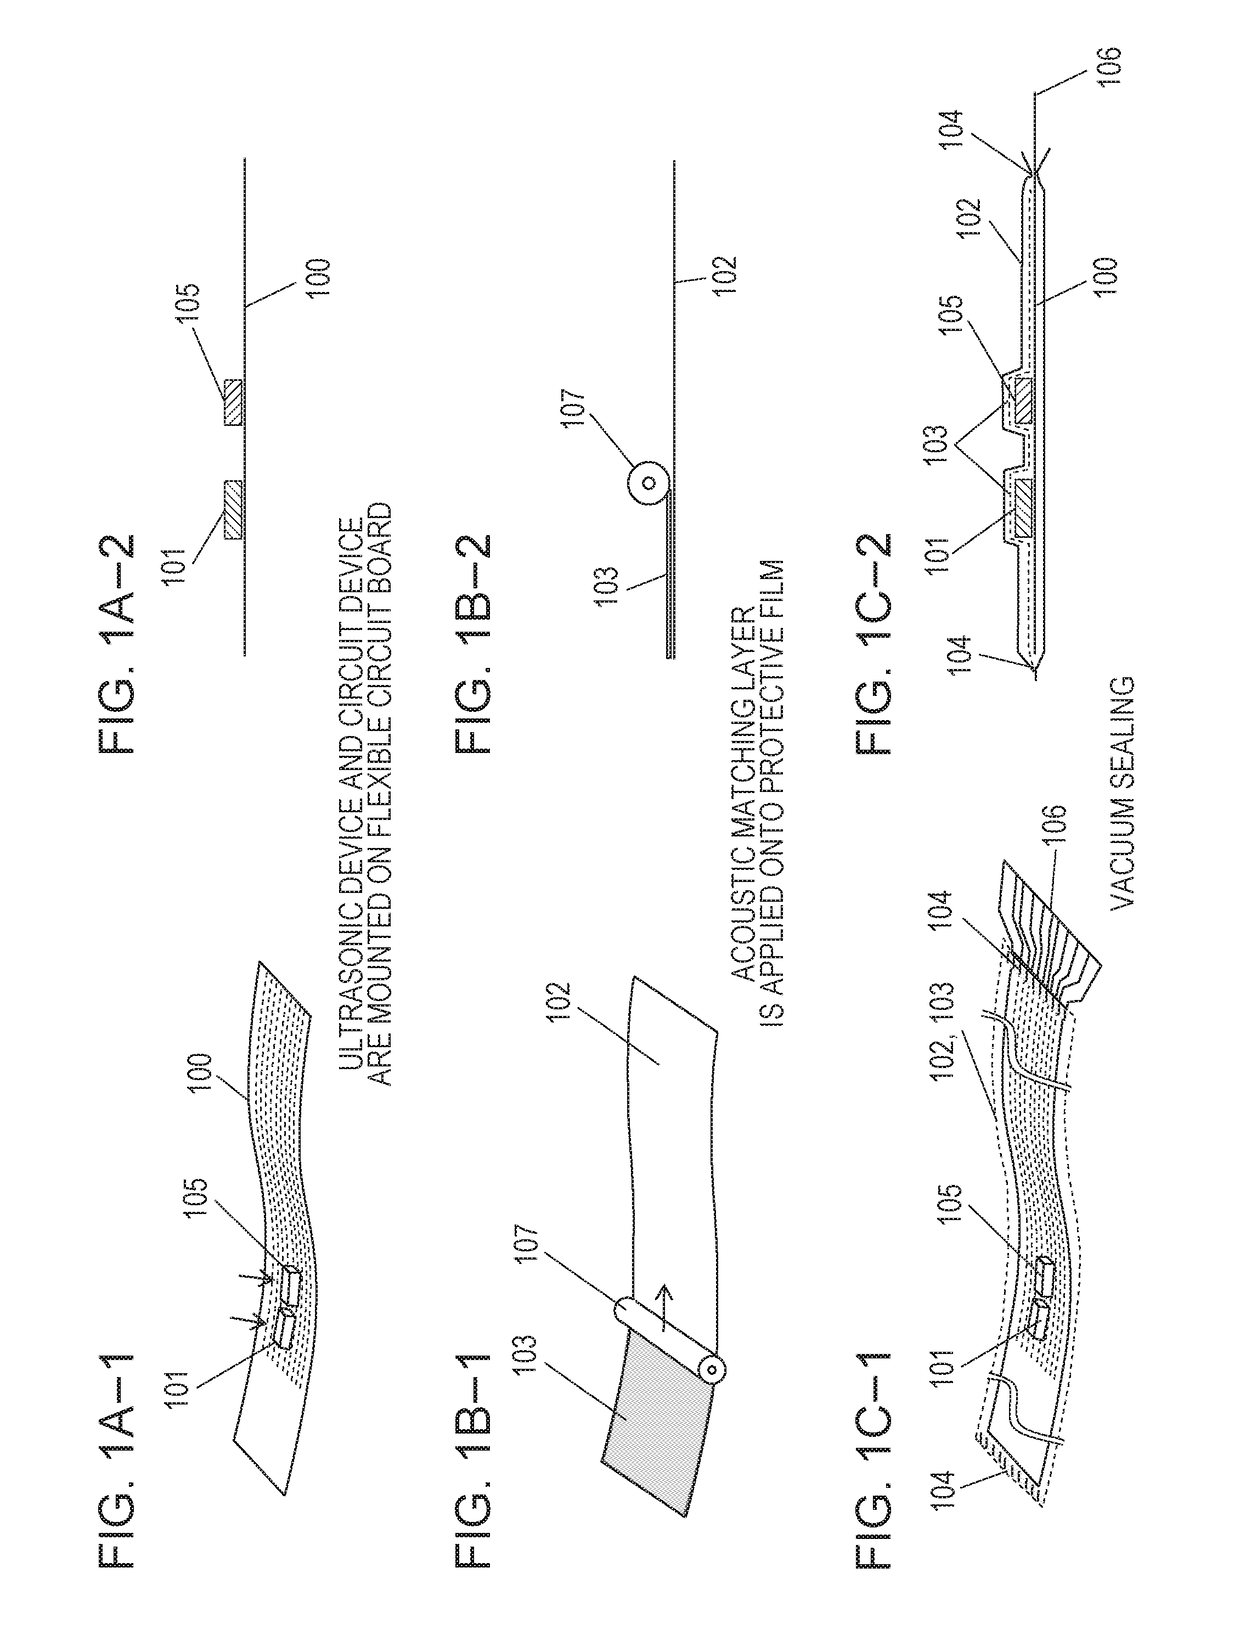 Ultrasonic transducer and method for manufacturing the same